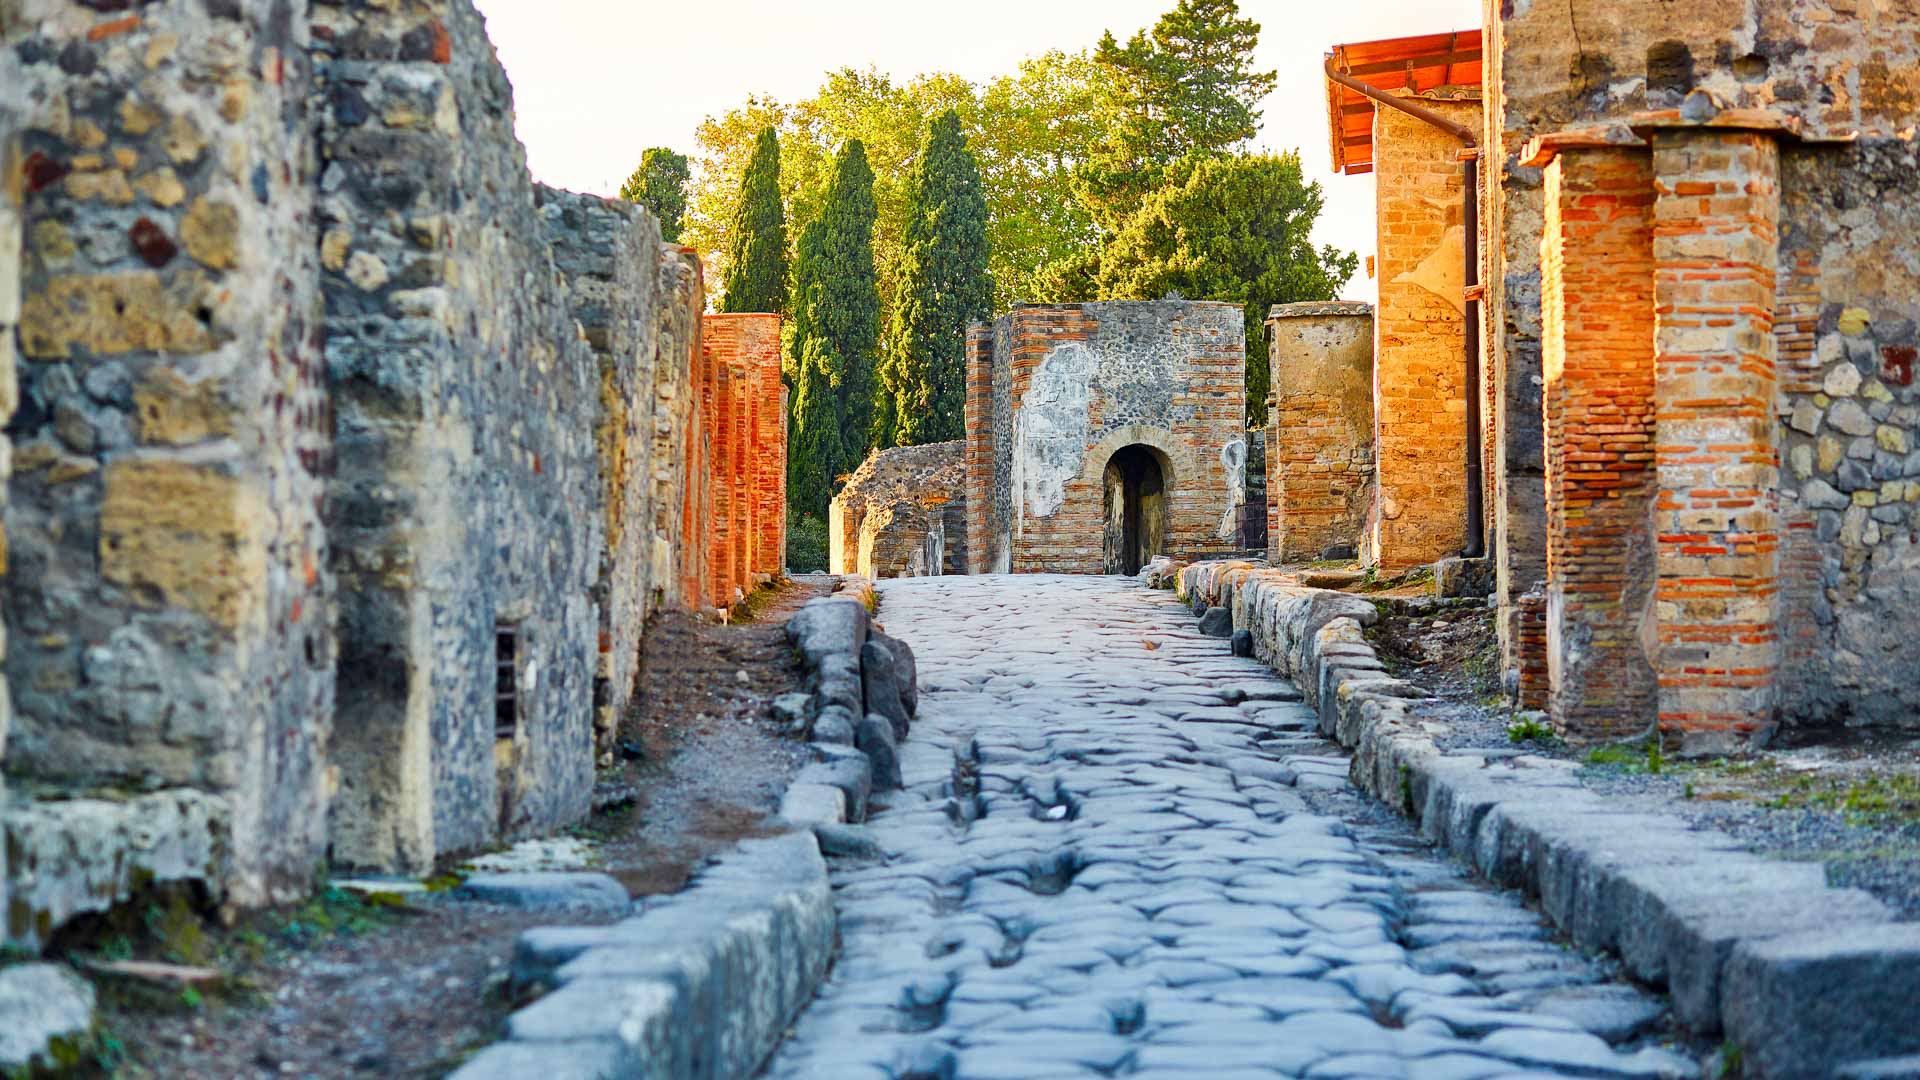 can you visit the city of pompeii